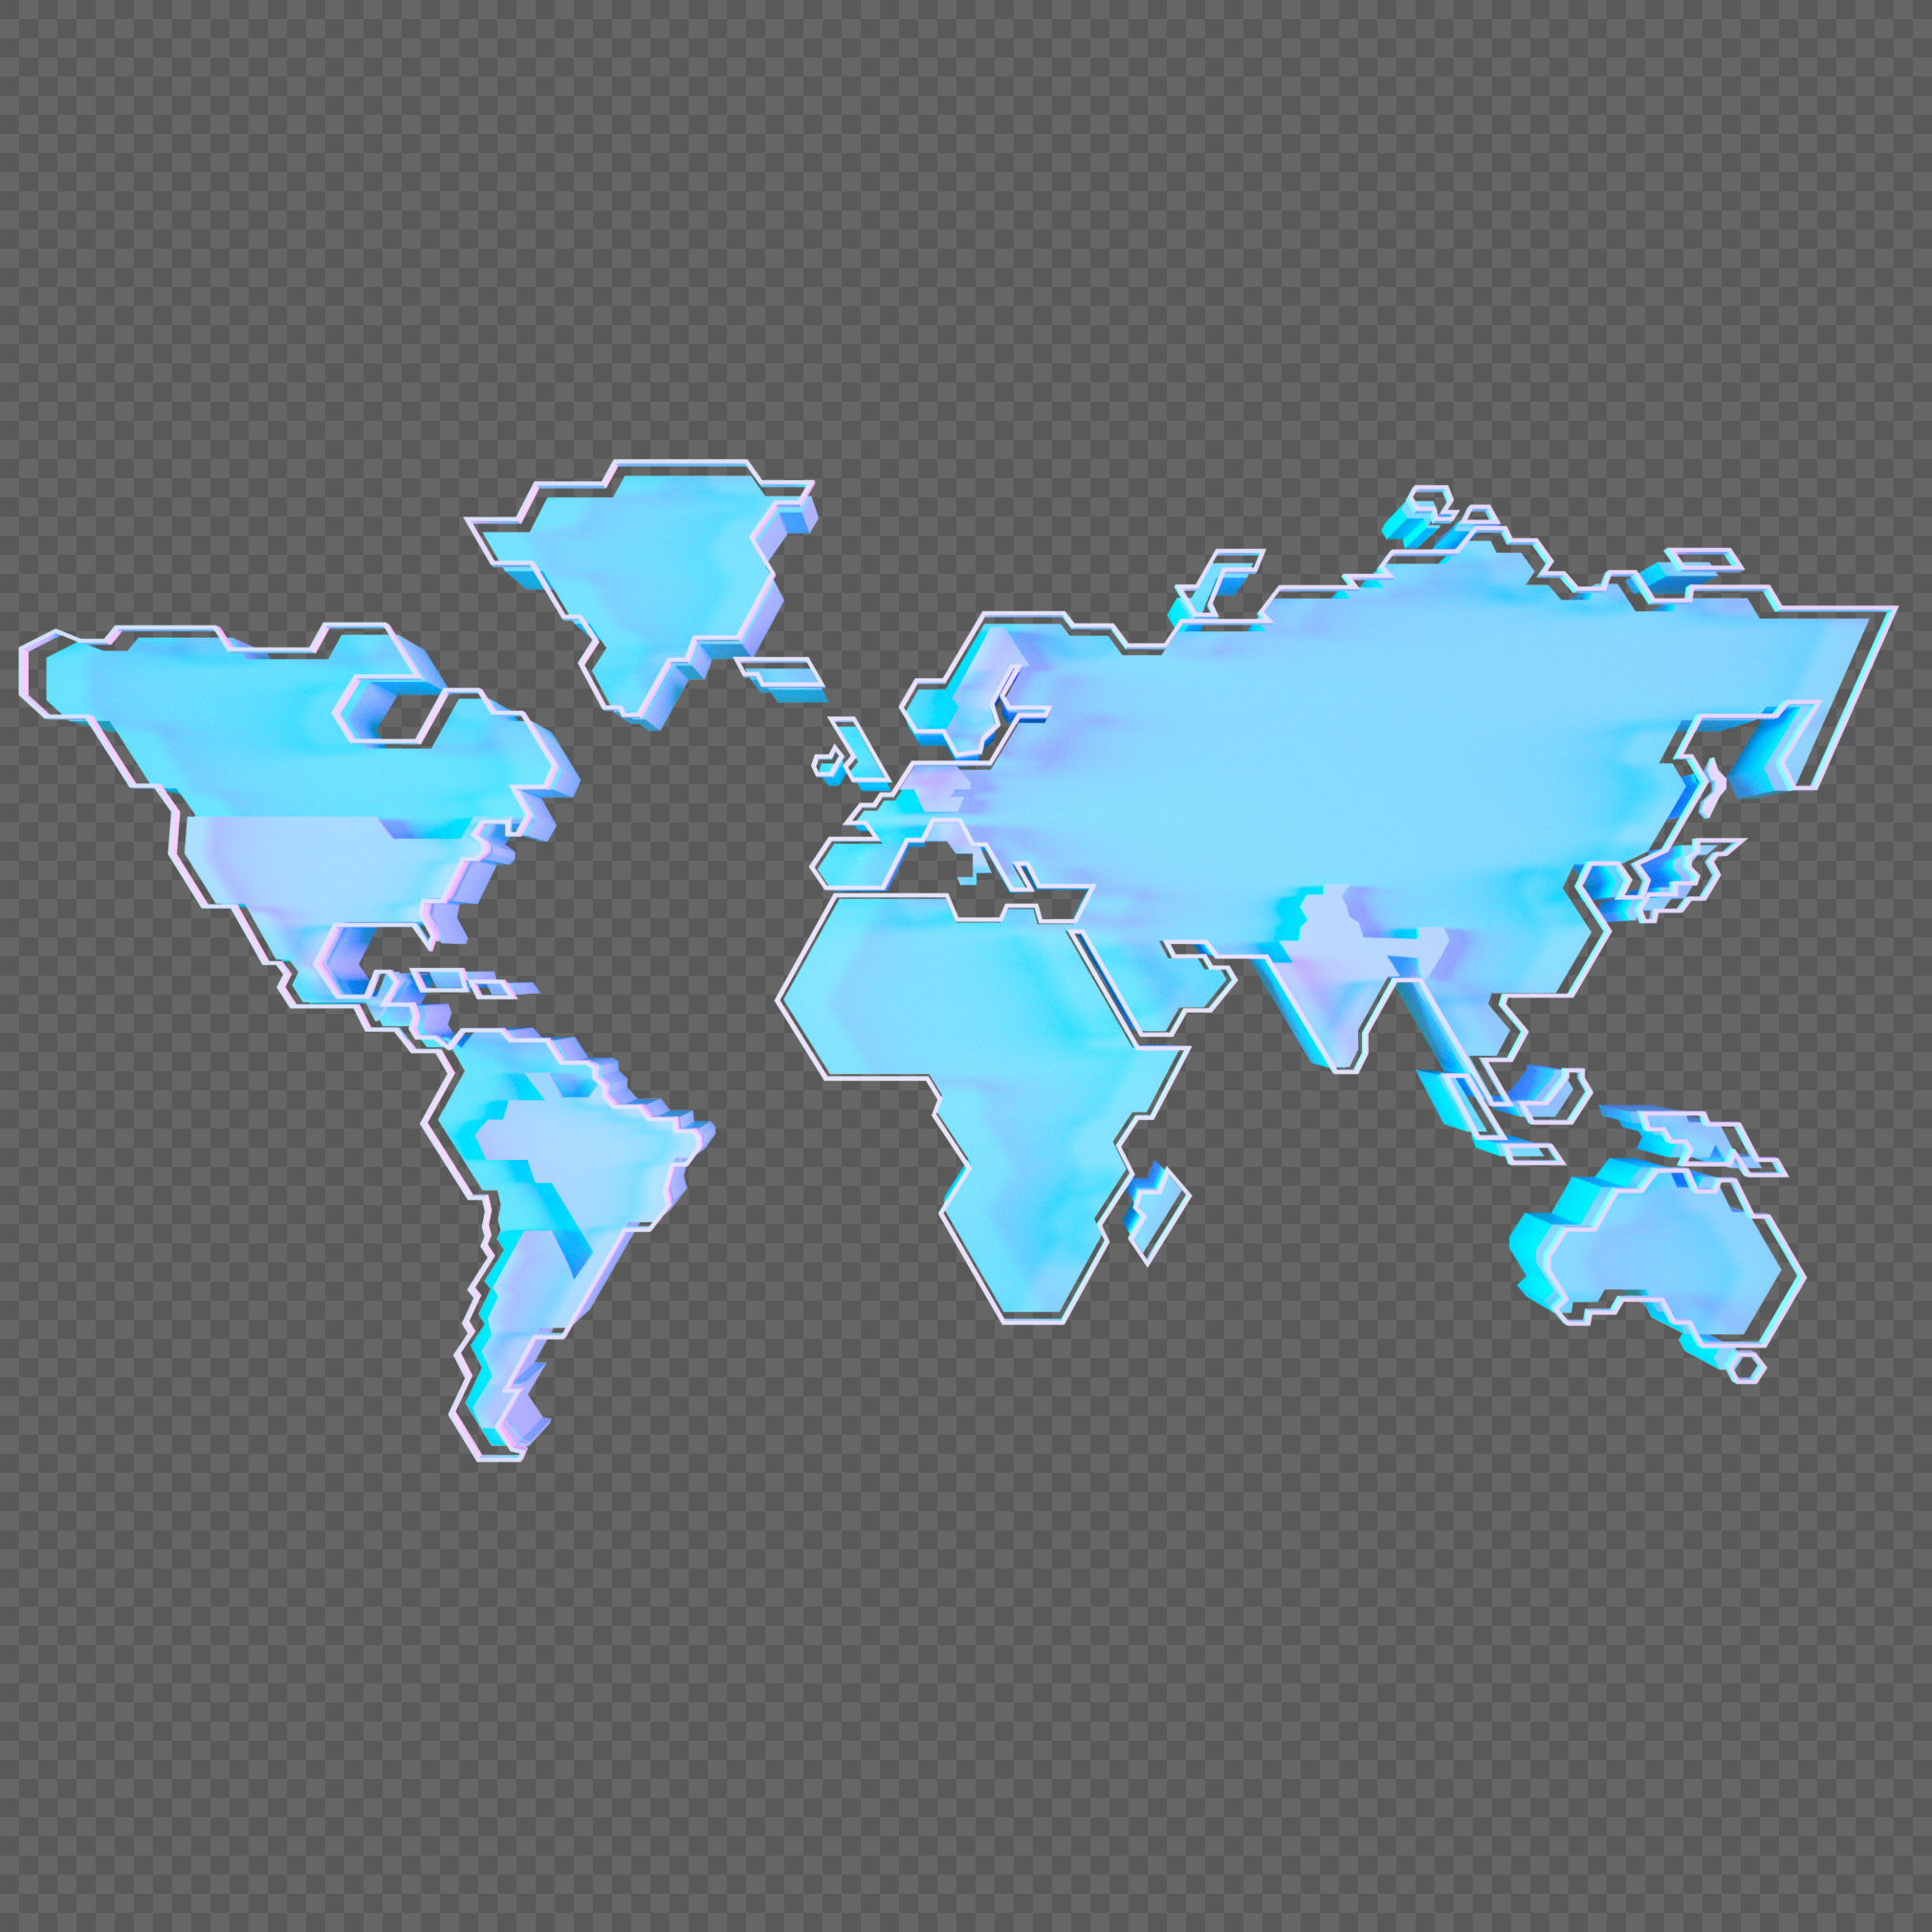 3d model of technology future world map png image_picture free download ...